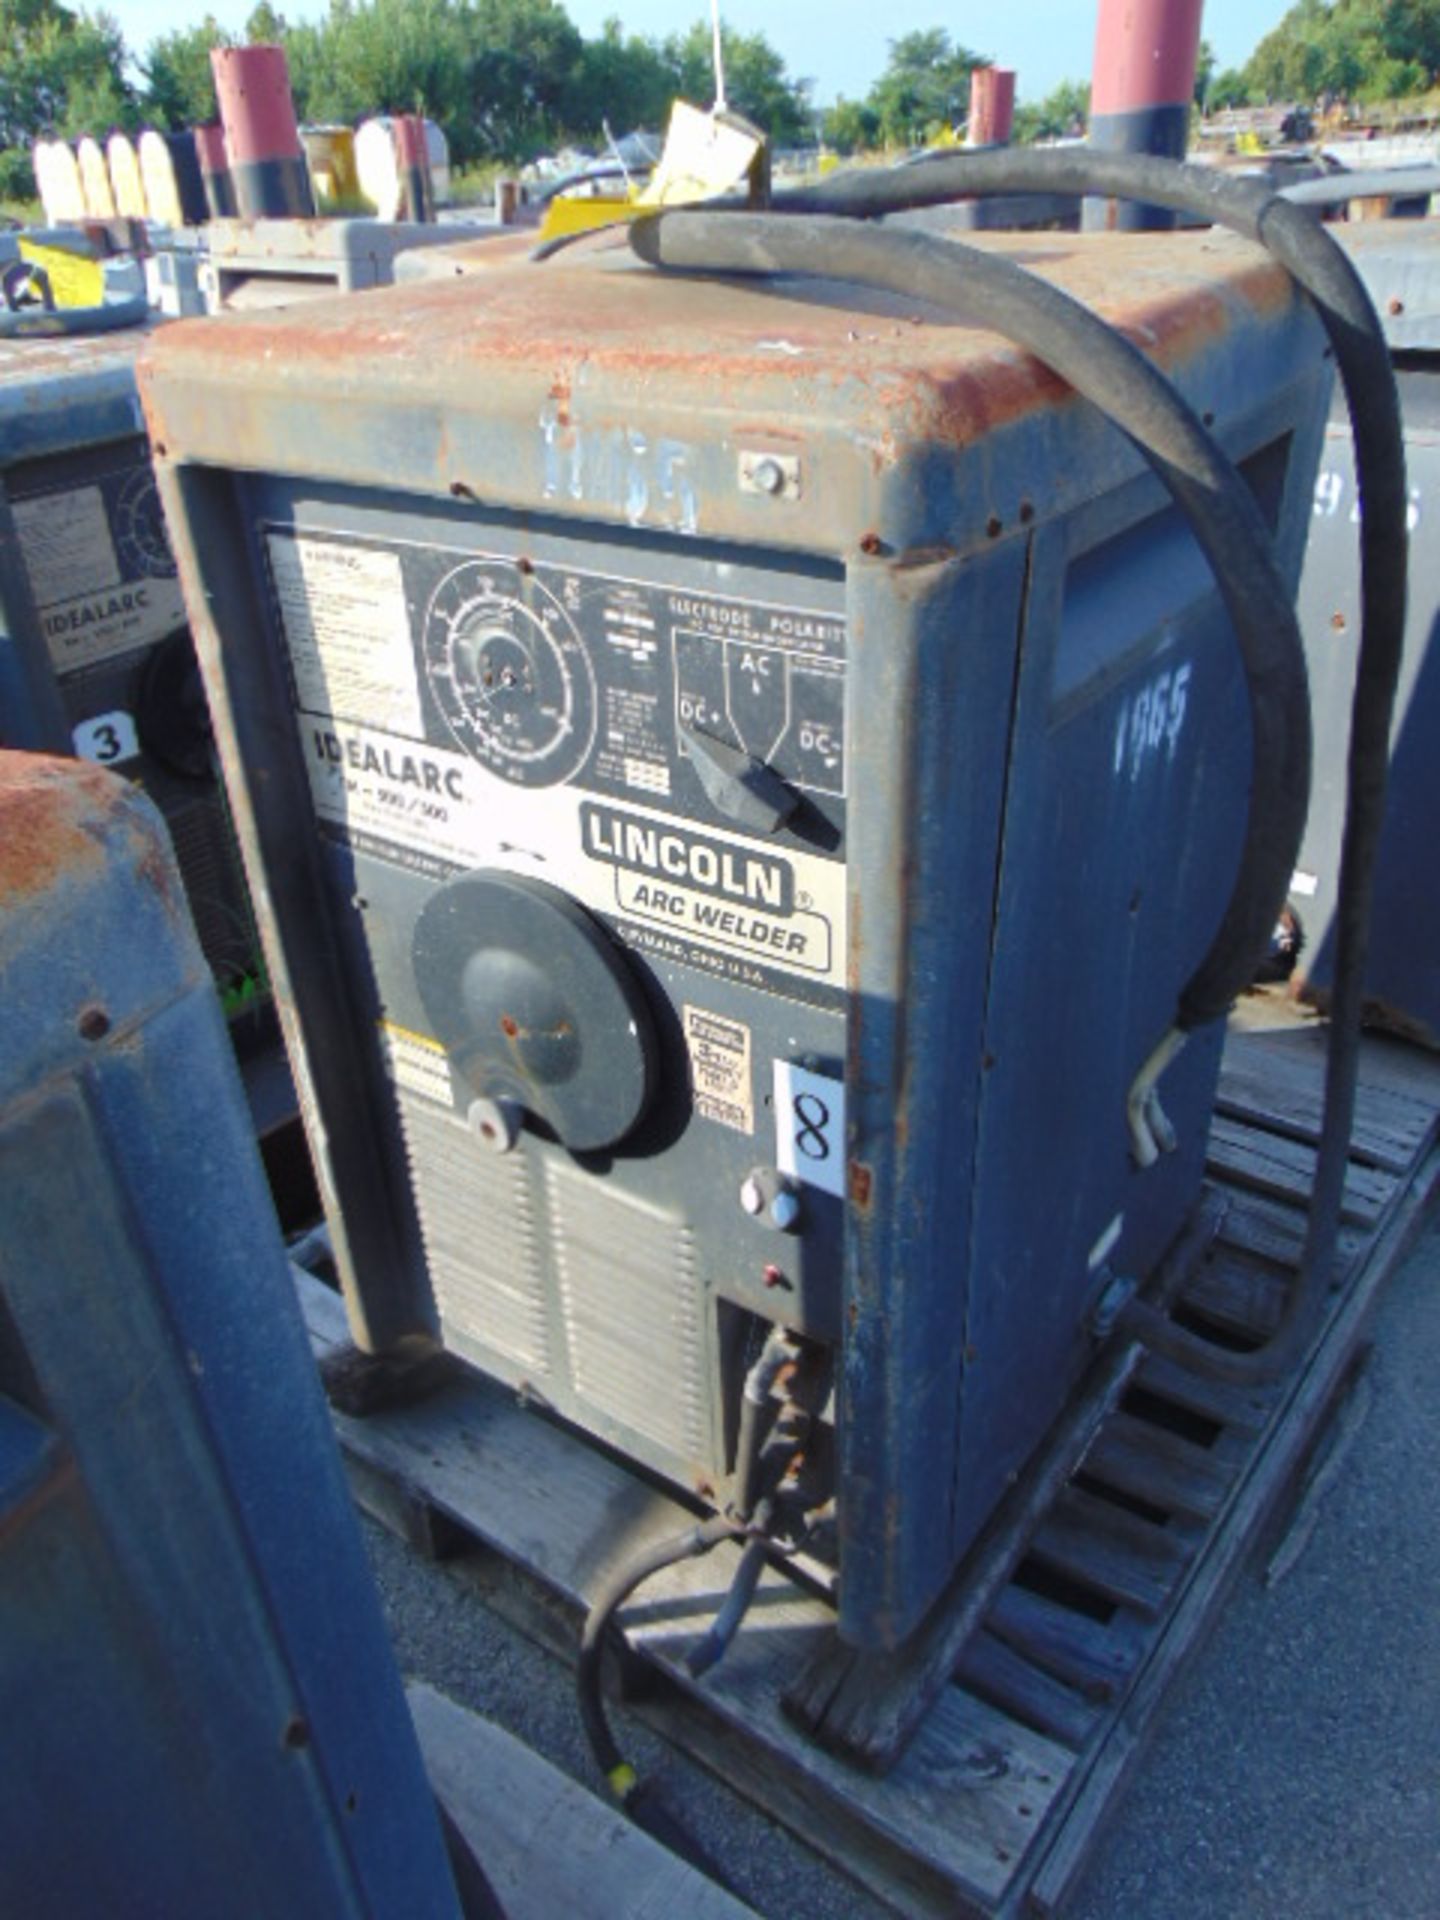 LOT OF ARC WELDERS (7), LINCOLN IDEALARC TM-500/500 - Image 4 of 7